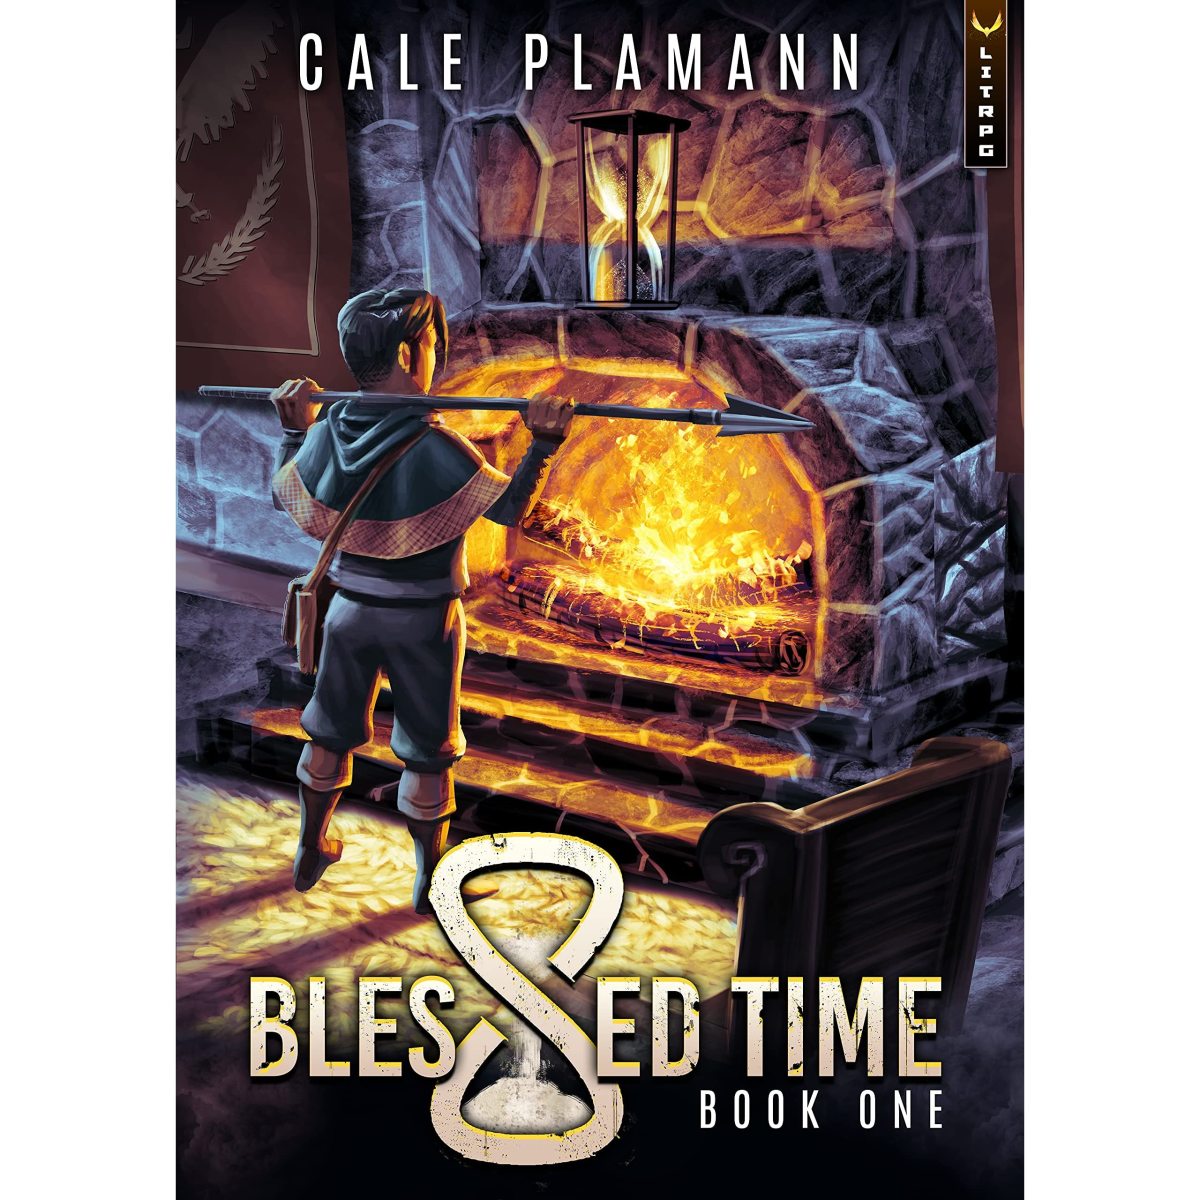 Blessed Time by Cale Plamann